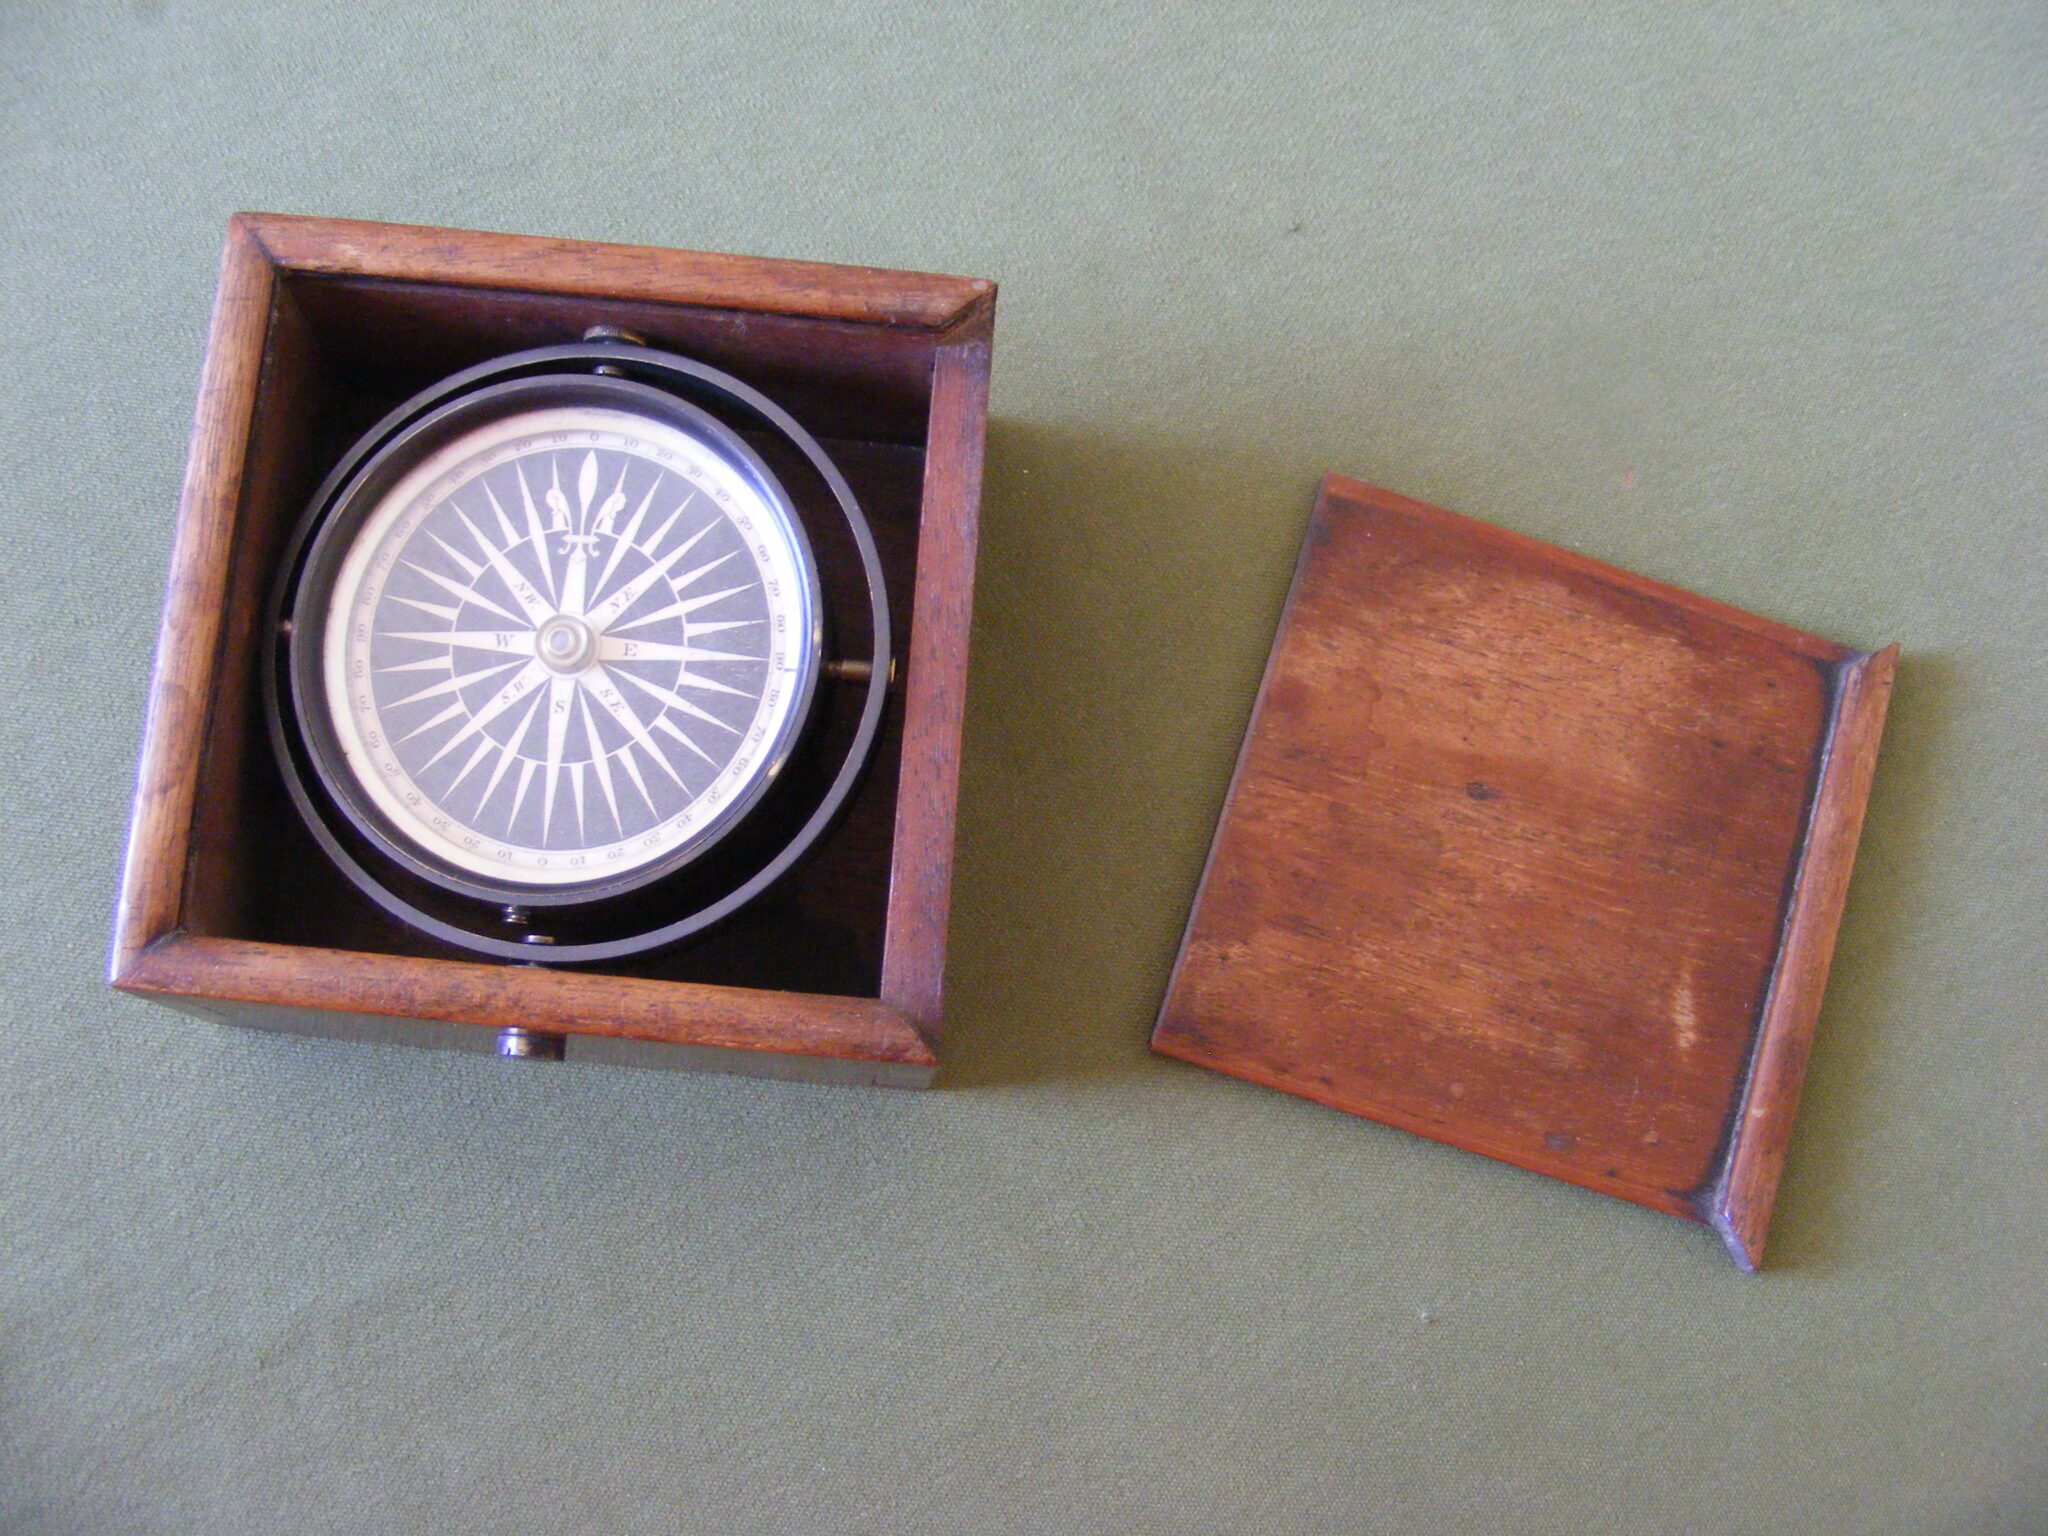 MARINERS PORTABLE COMPASS.